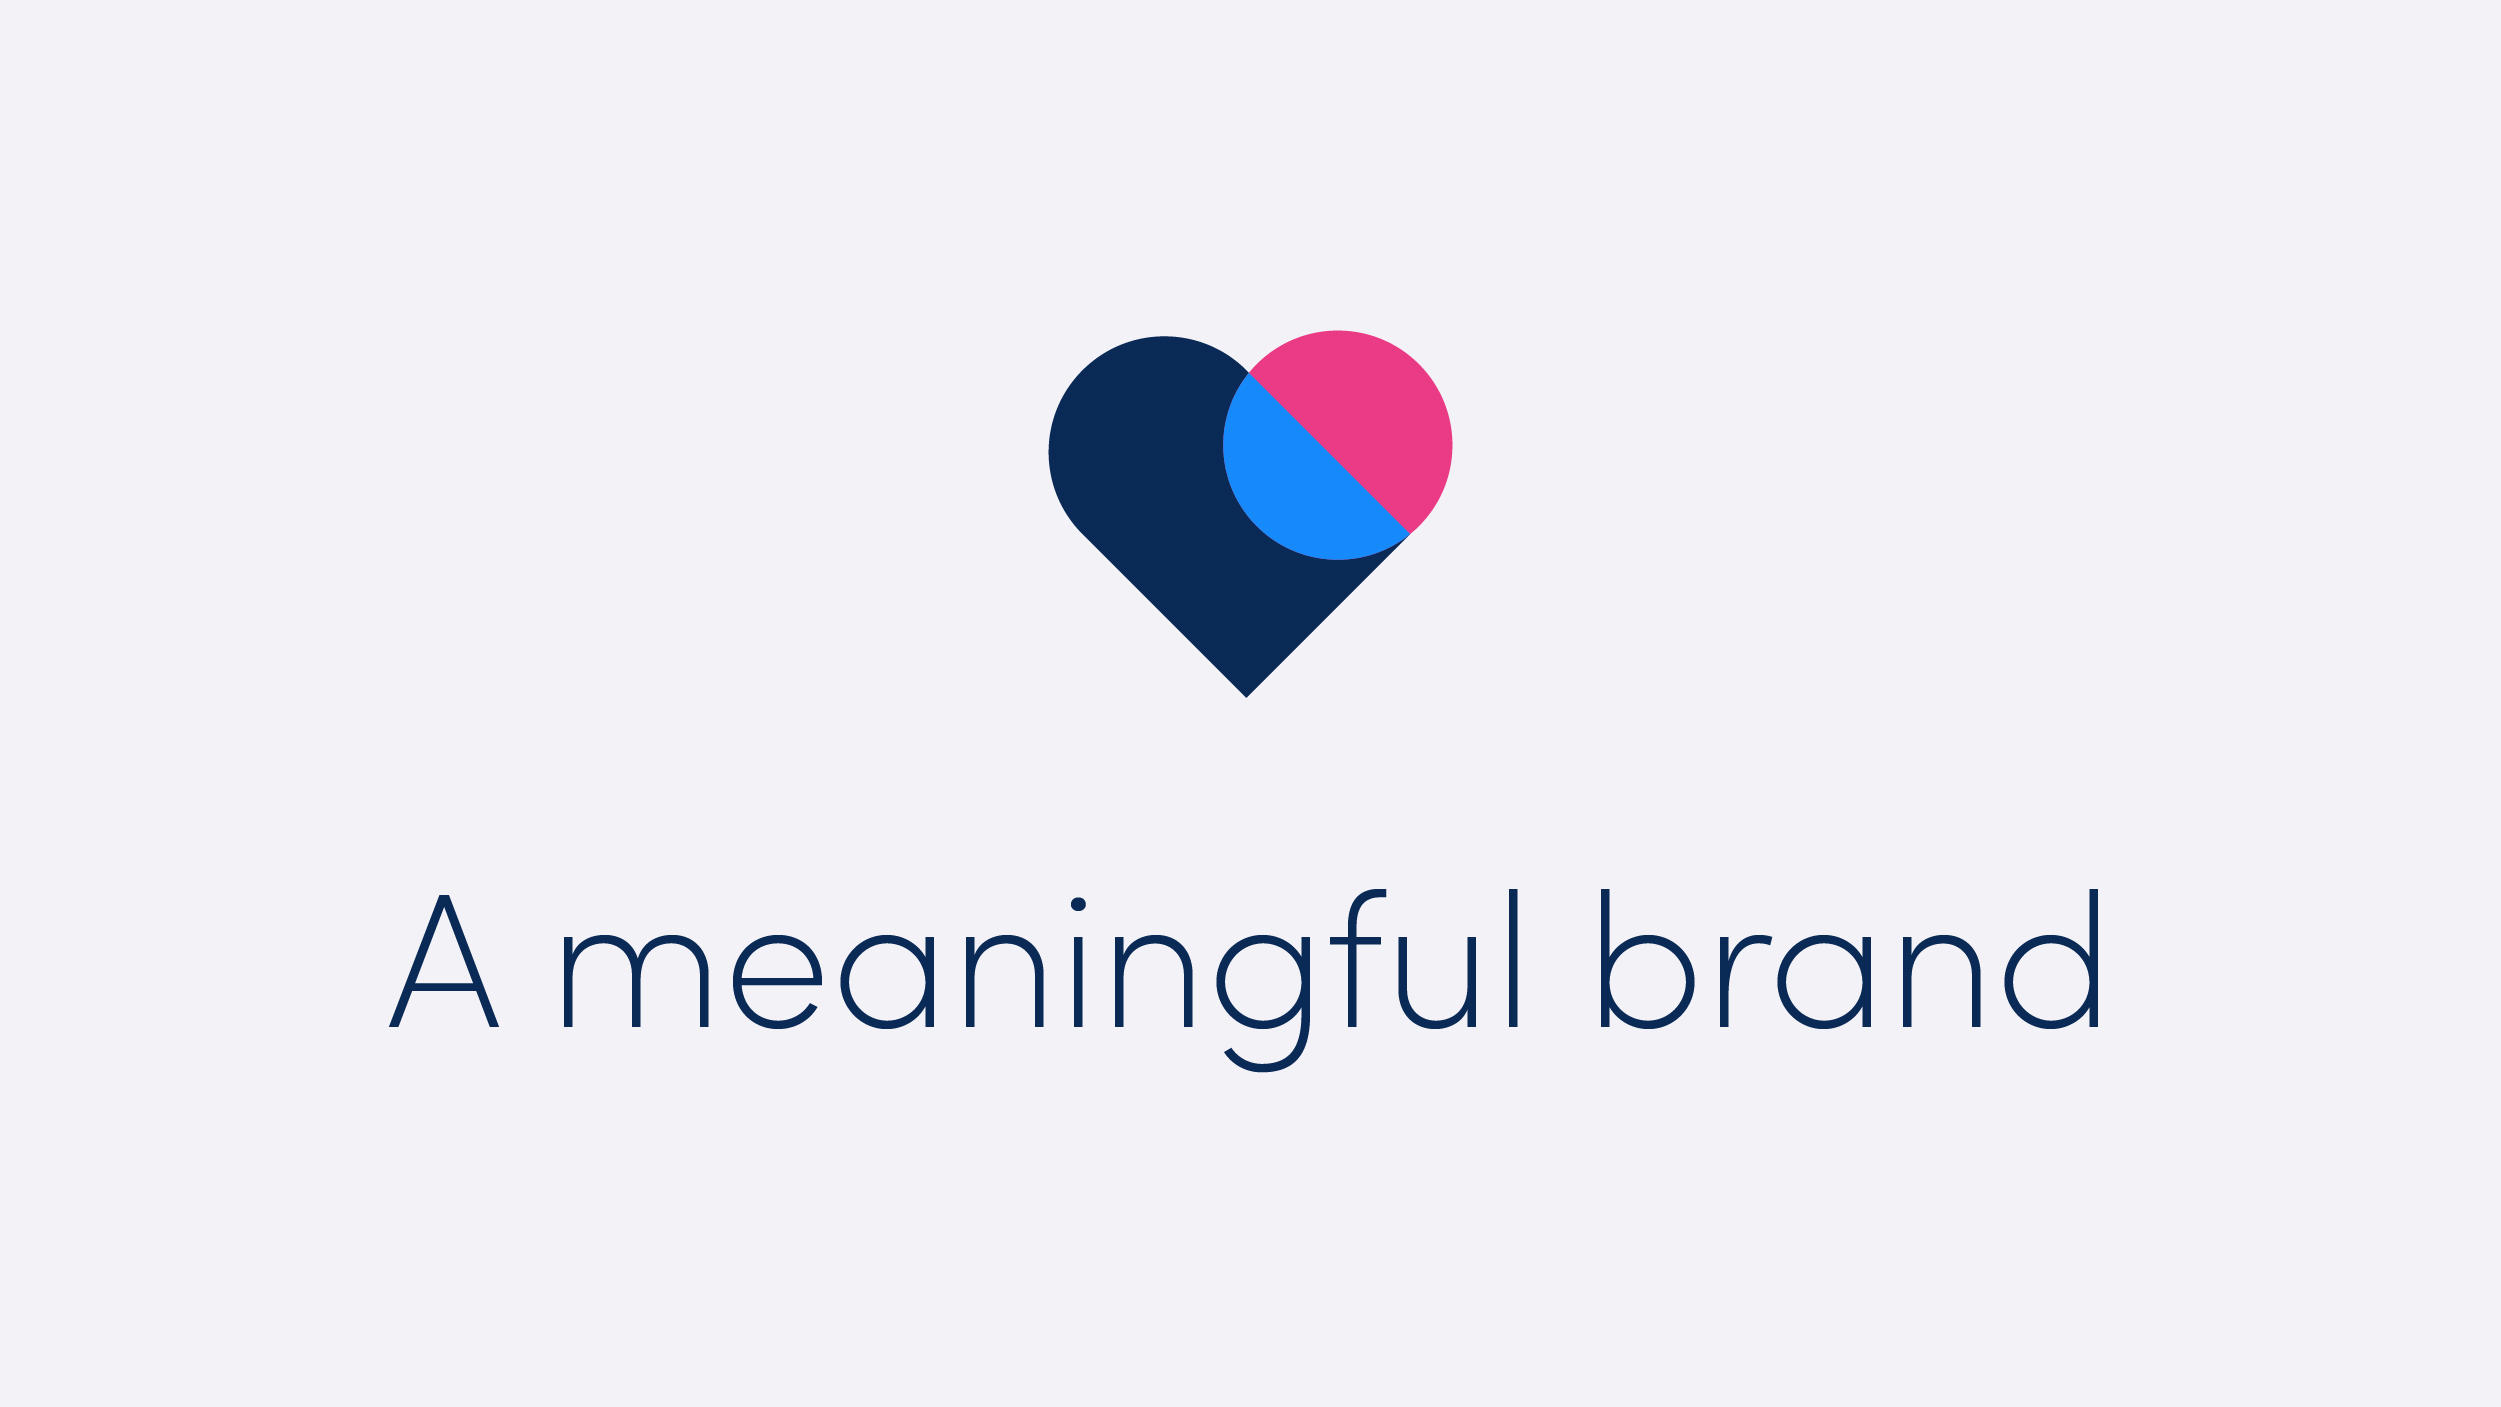 InspiringApps Launches New Brand and Website